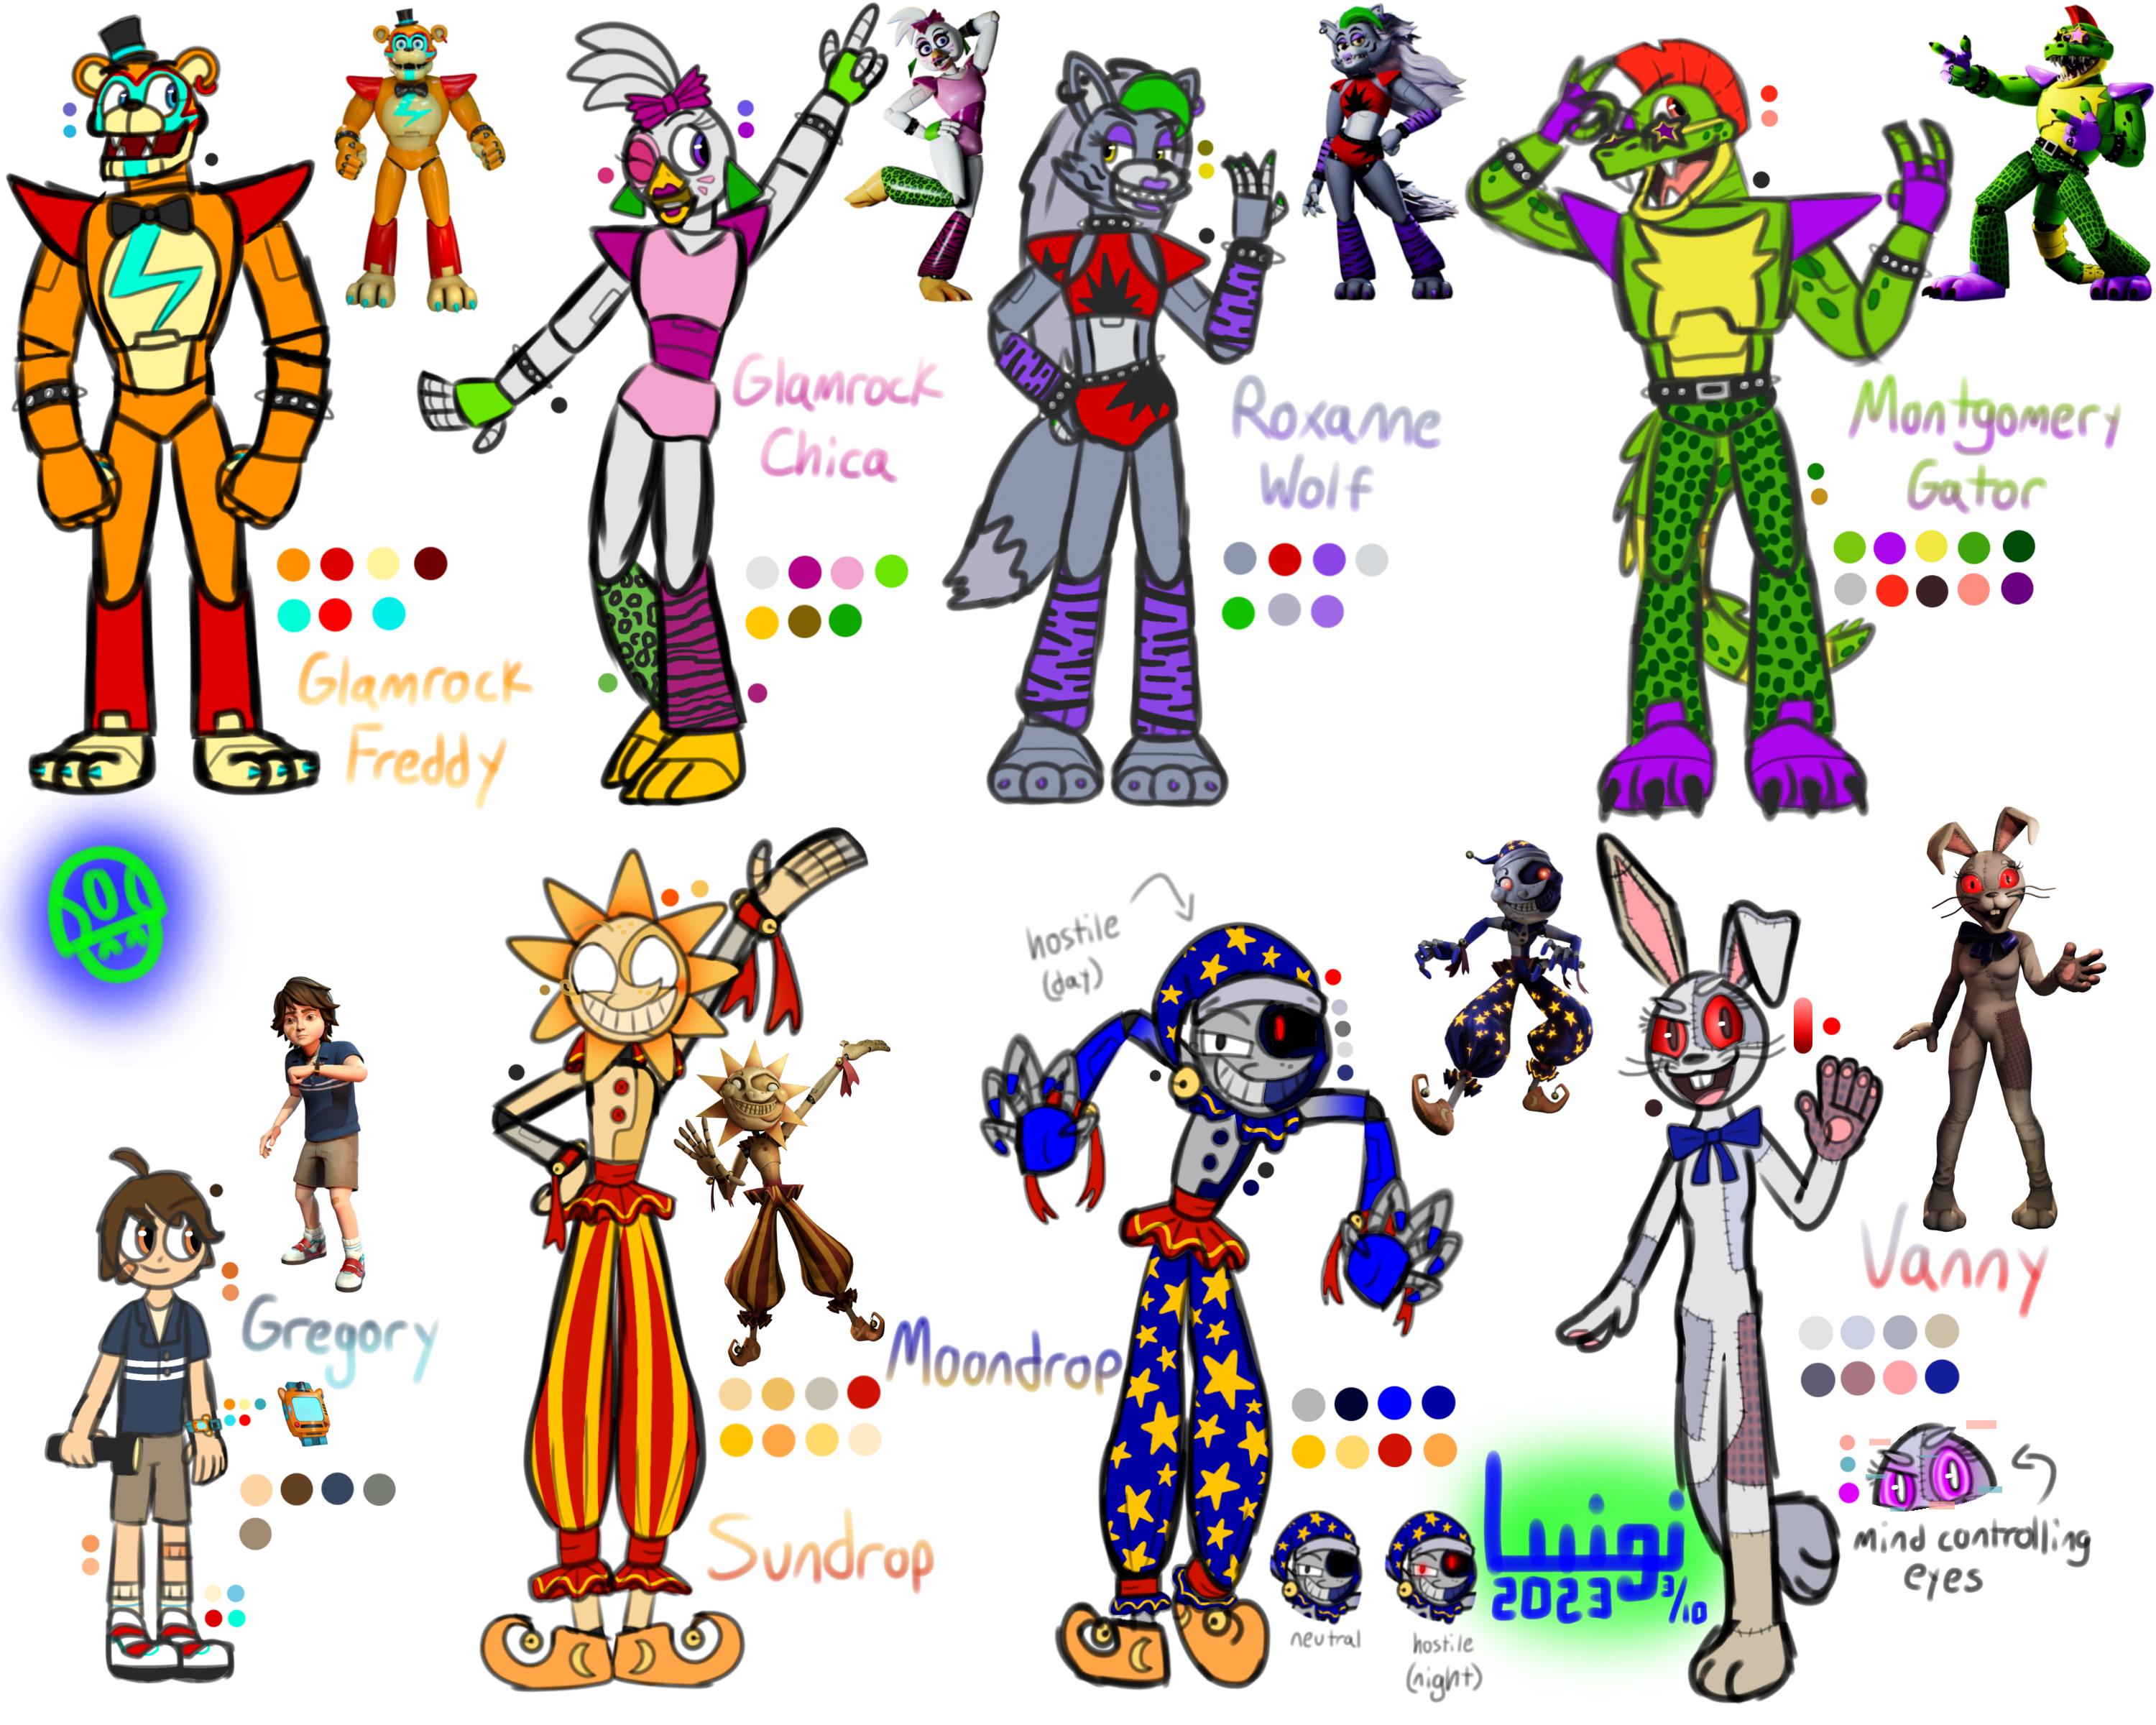 The blair and Abby evolution in 2023  Fnaf drawings, Character design, Fnaf  characters